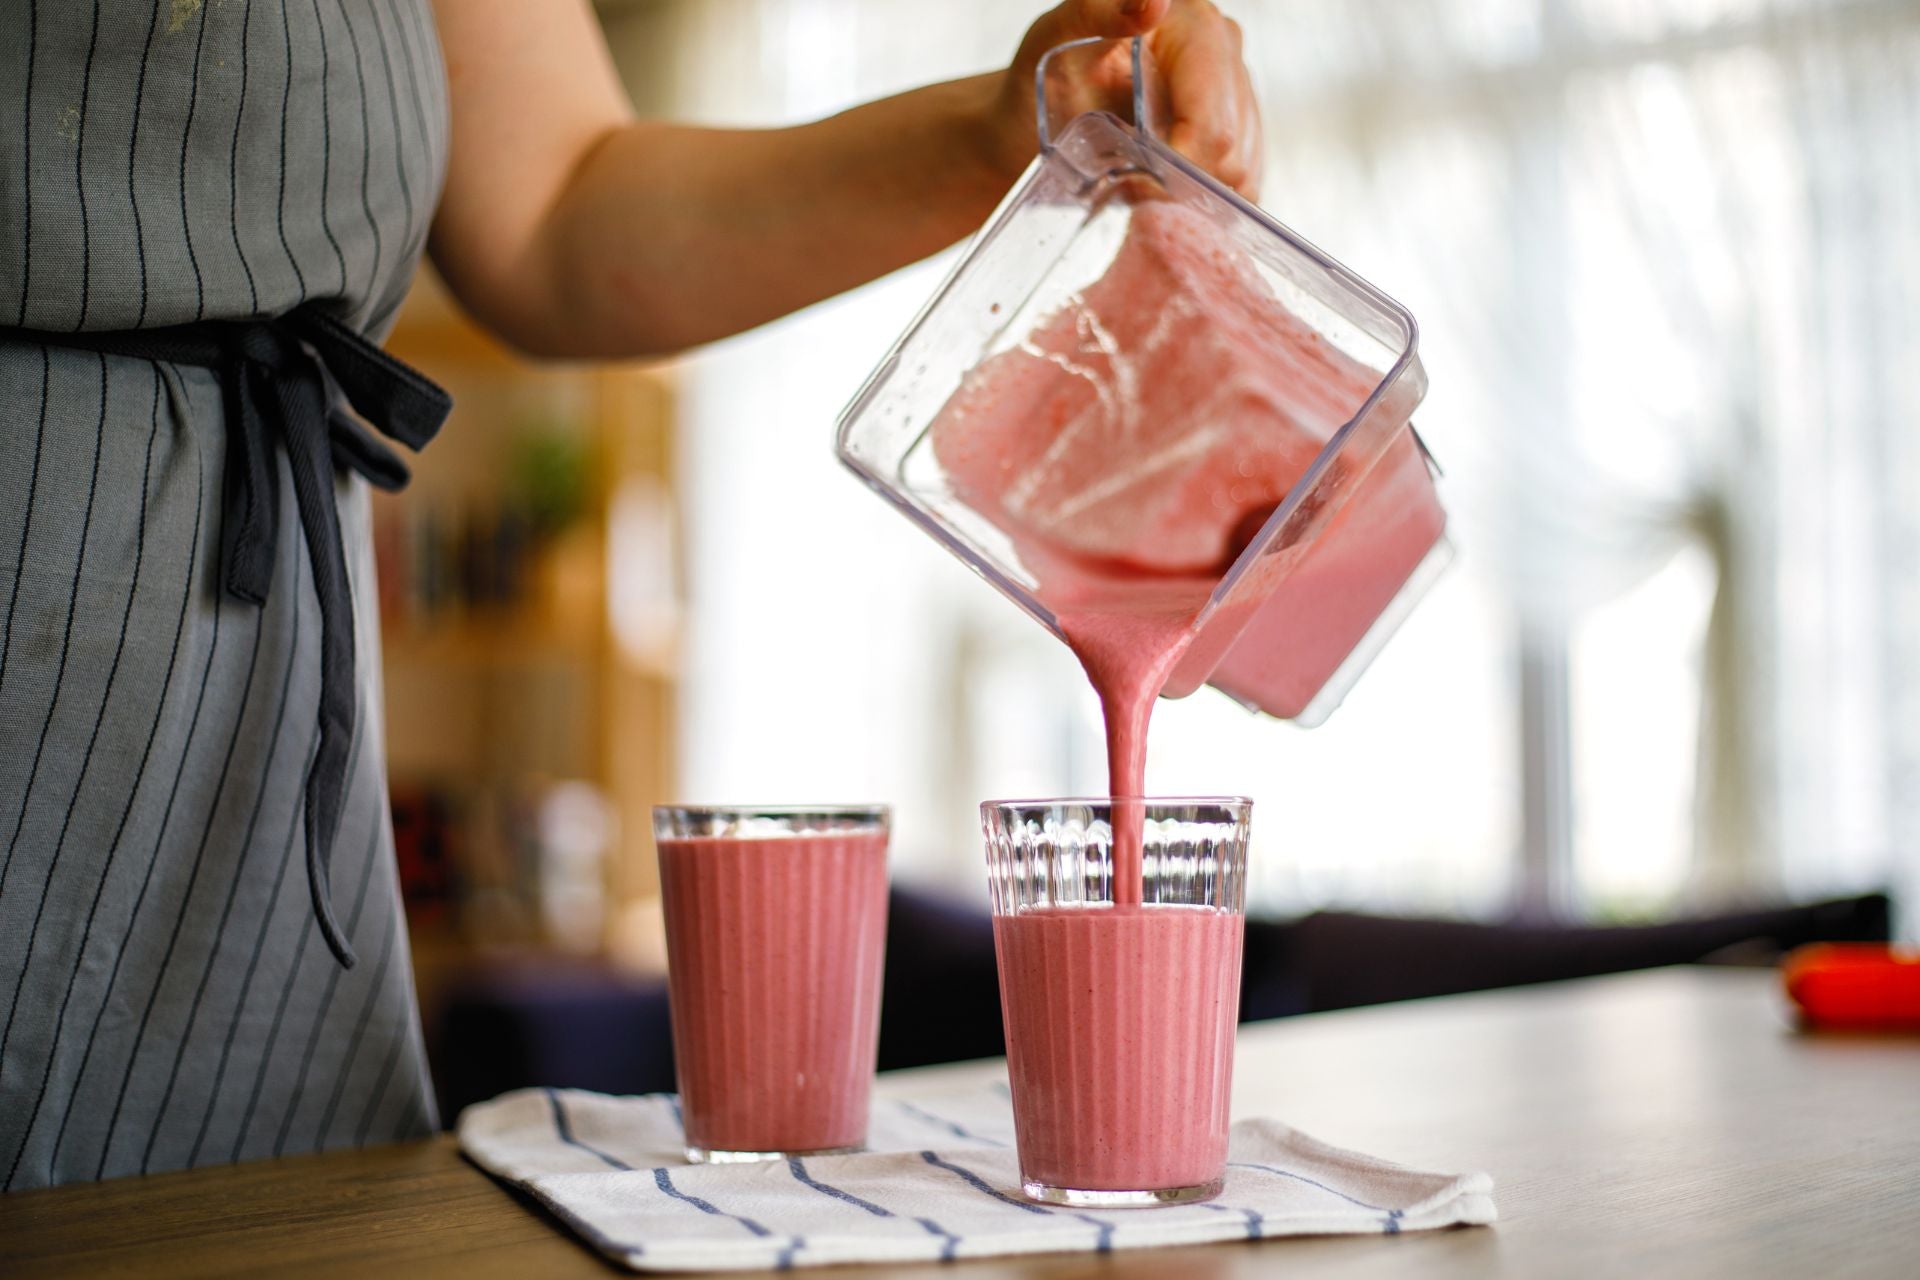 A person pours a blended pink smoothie into glass cups.